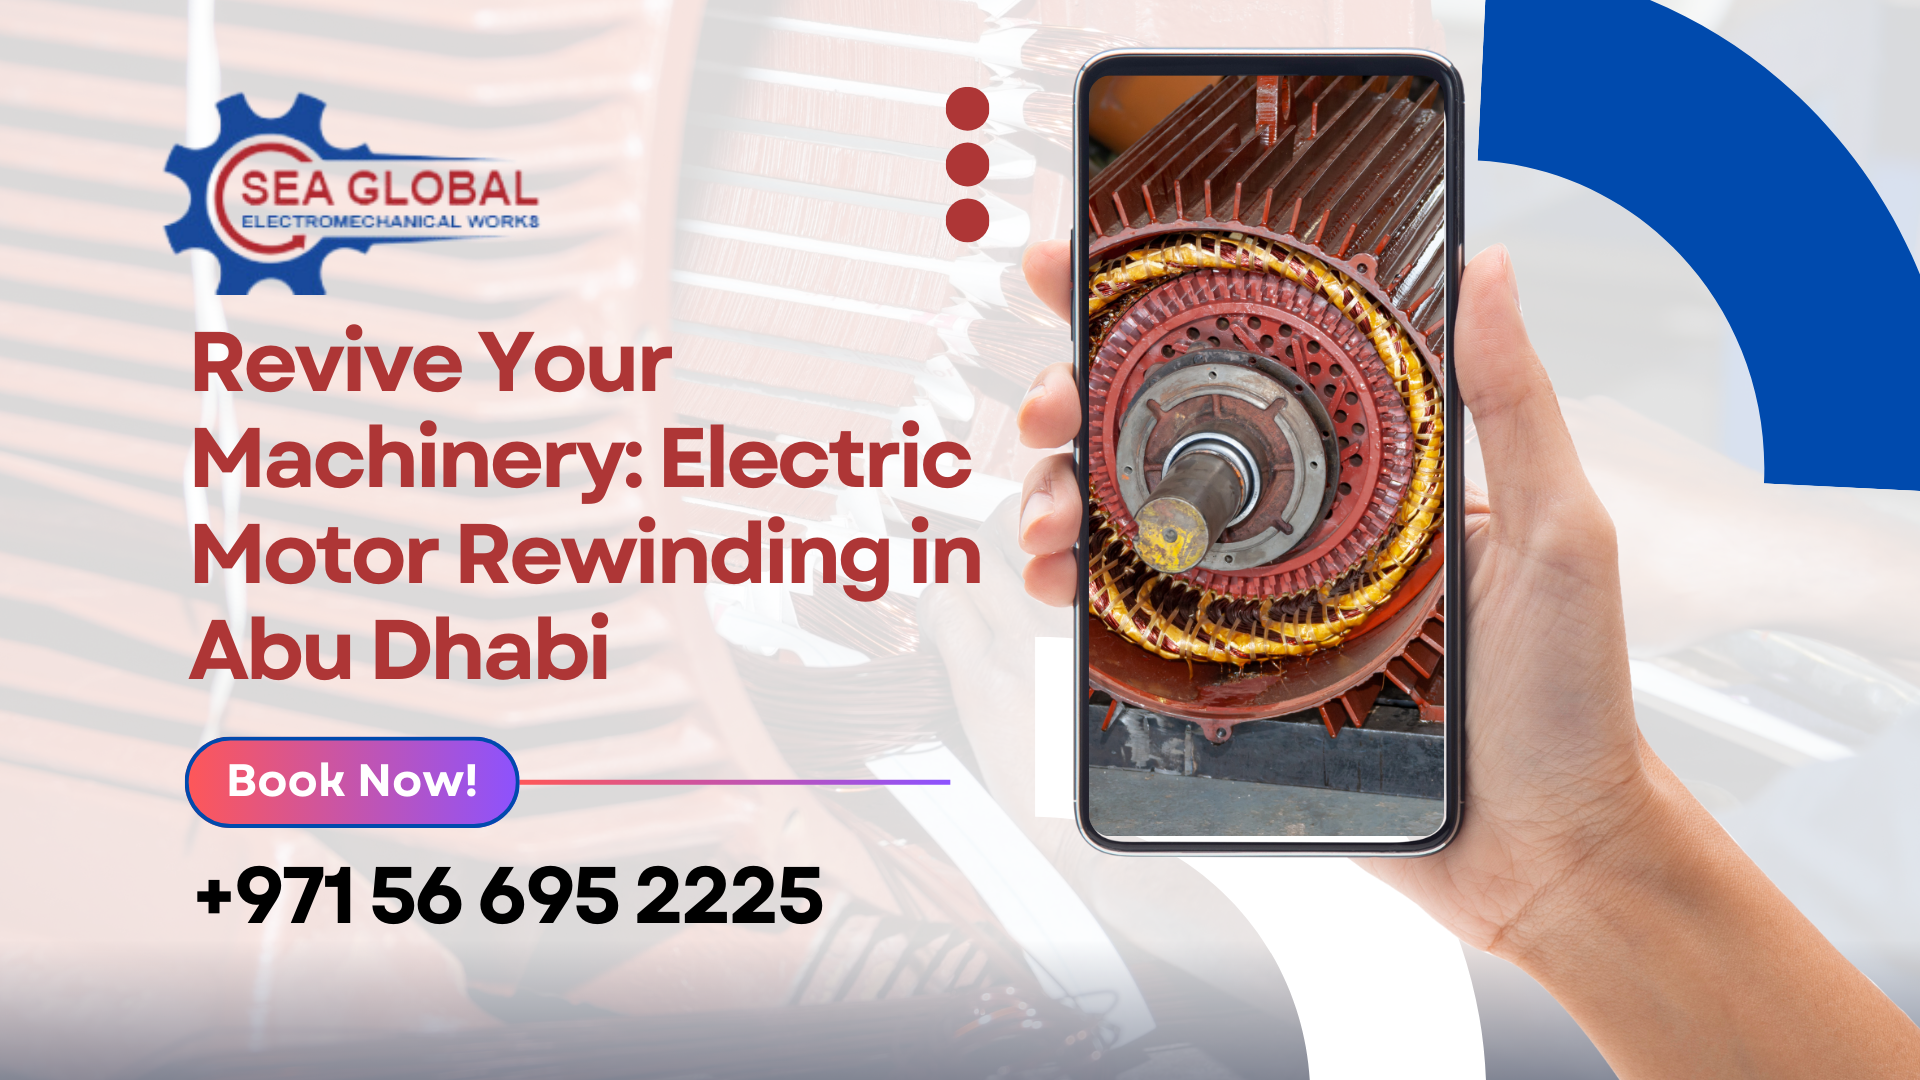 Revive Your Machinery: Electric Motor Rewinding in Abu Dhabi